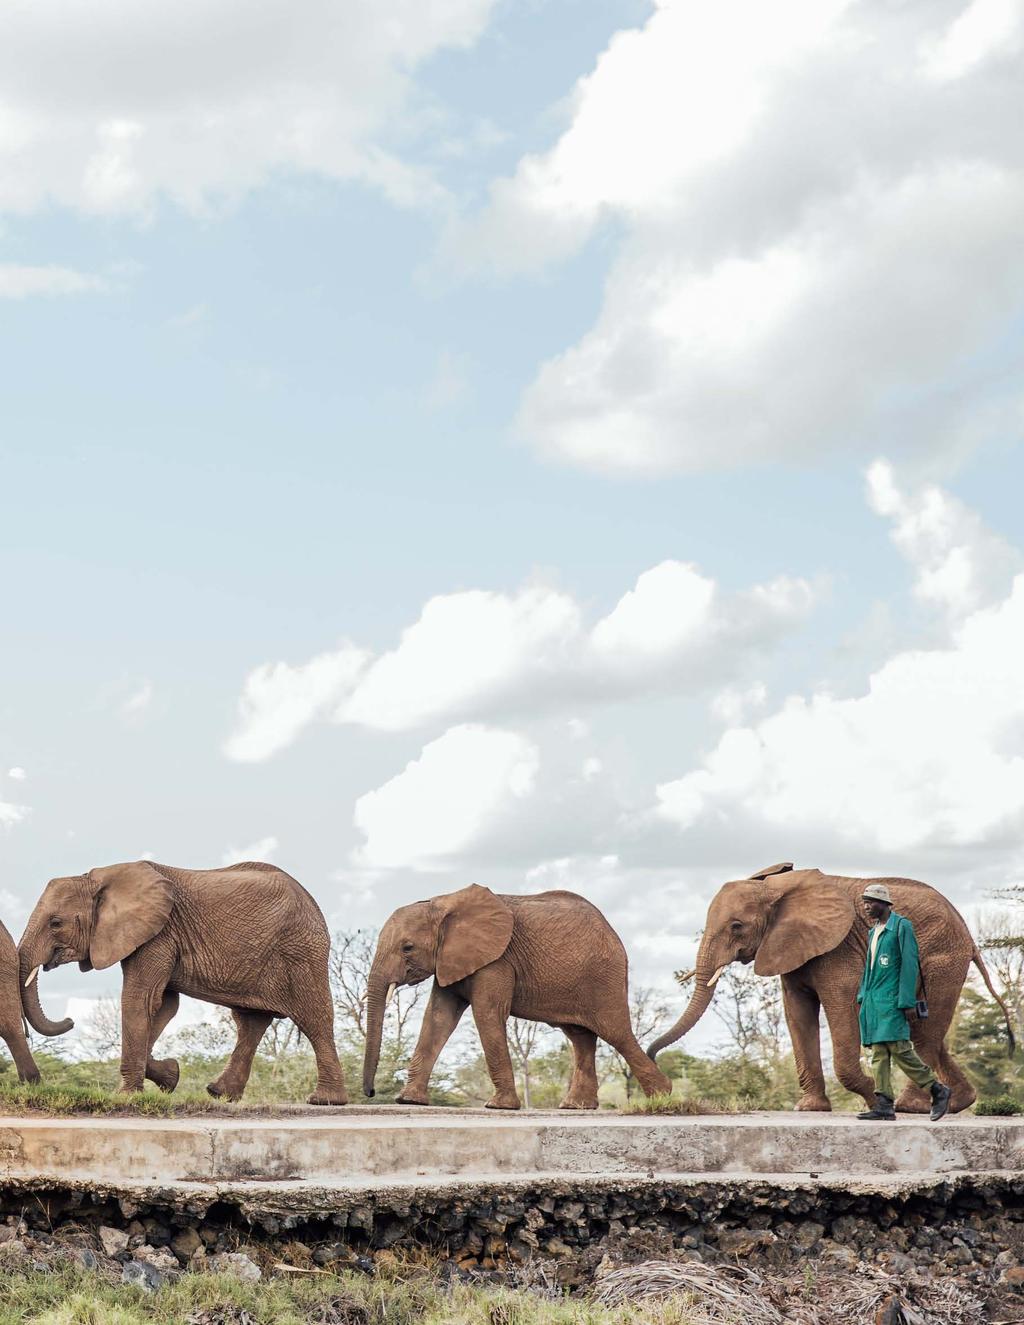 As the first warden of Tsavo East National Park, David Sheldrick charted a new course for conservation in Kenya, securing wilderness, studying flora and fauna, and combating poaching and other